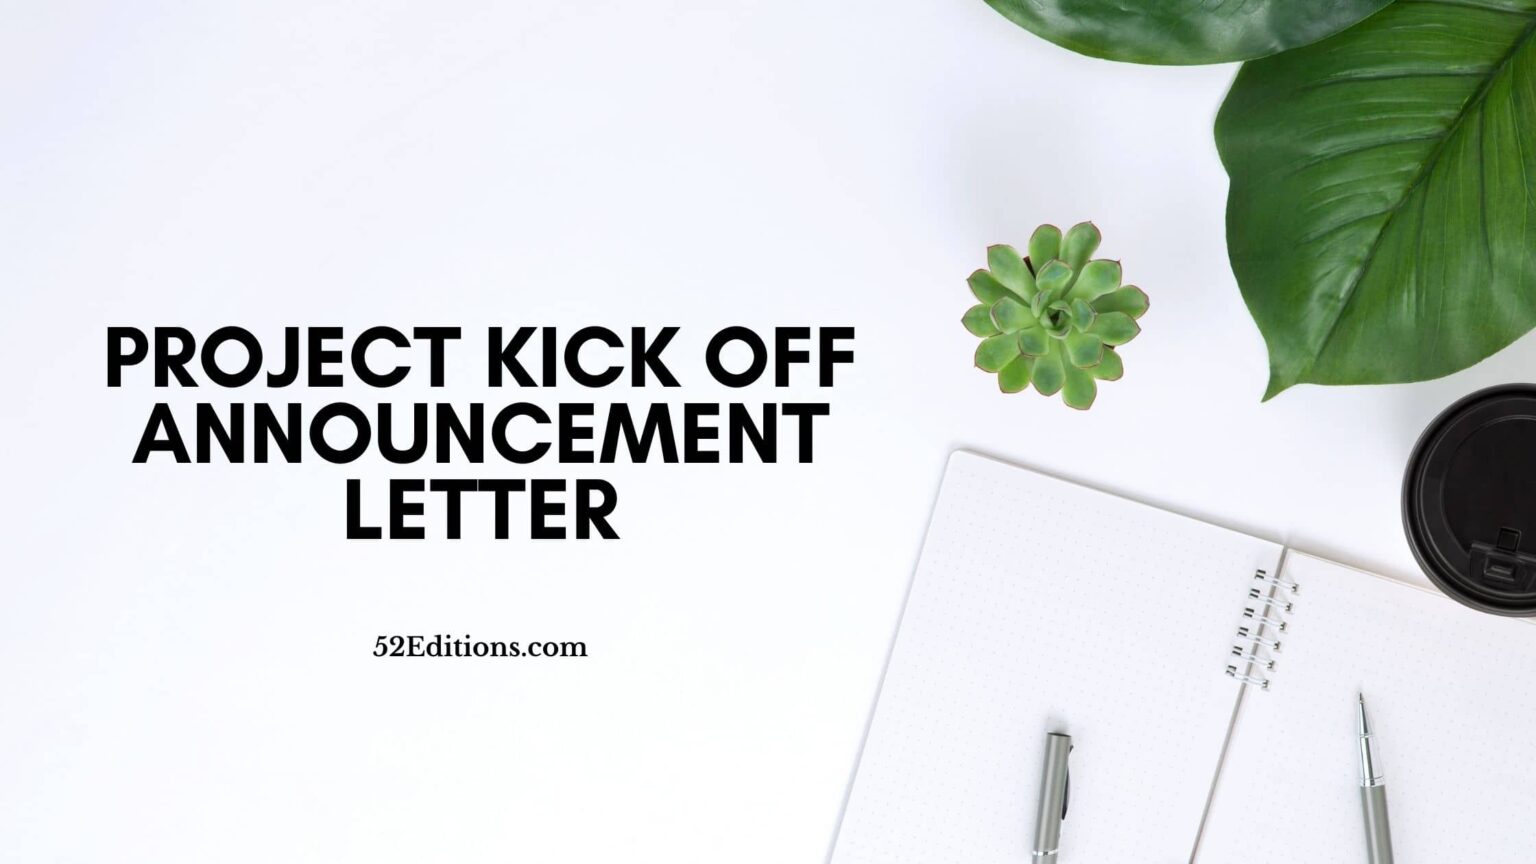 Project Kick Off Announcement Letter // Get FREE Letter Templates